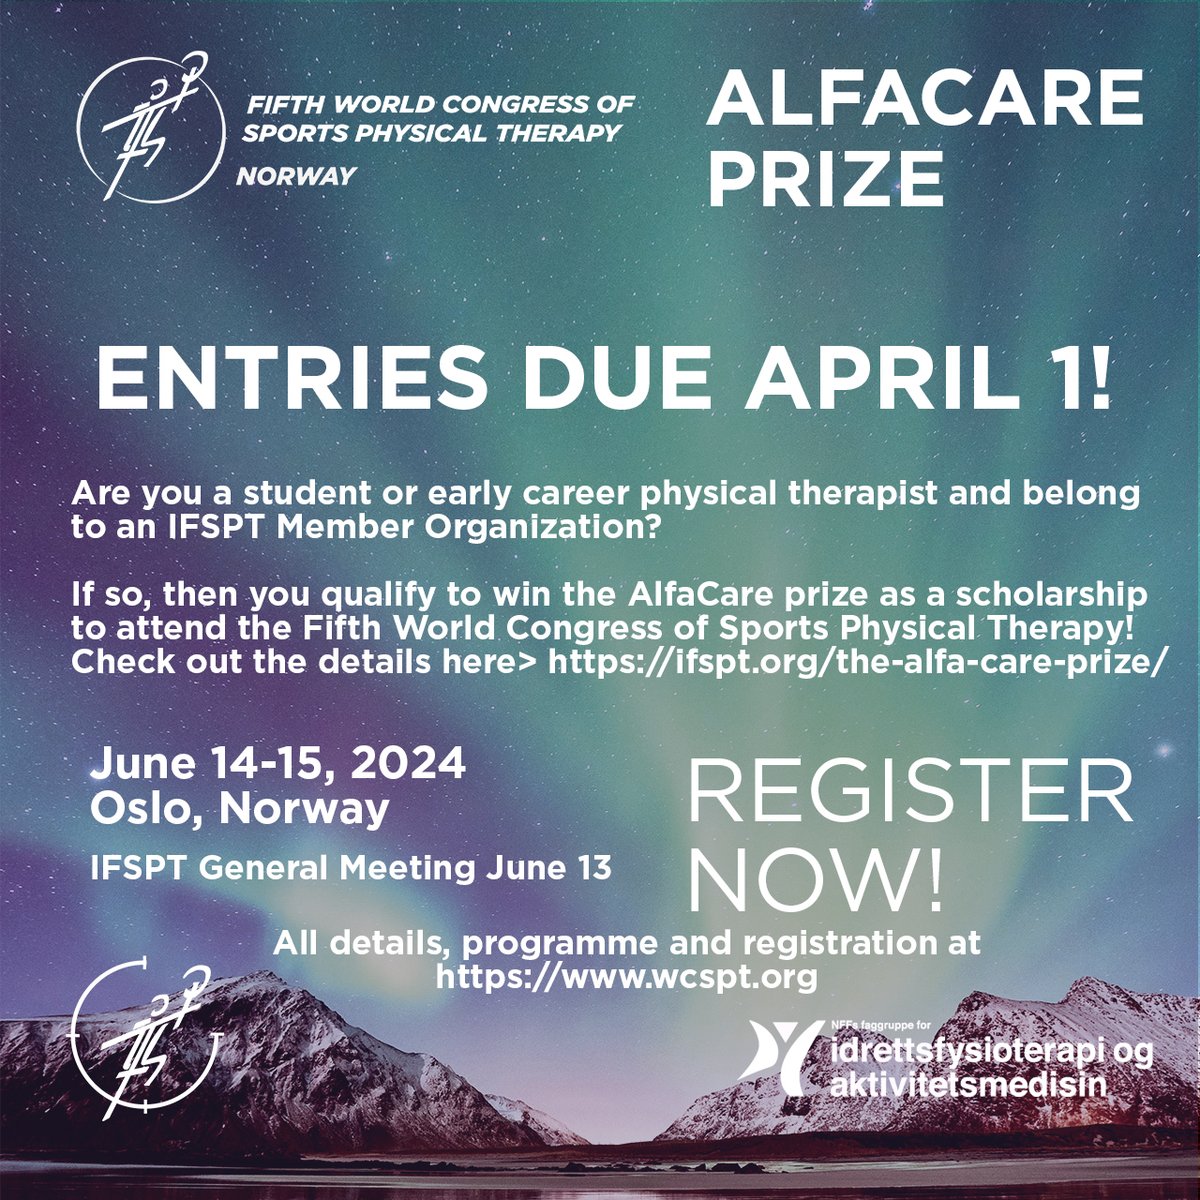 ENTER BY APRIL 1! Win a 1000 Euro scholarship to the World Congress! All details here: ifspt.org/the-alfa-care-…